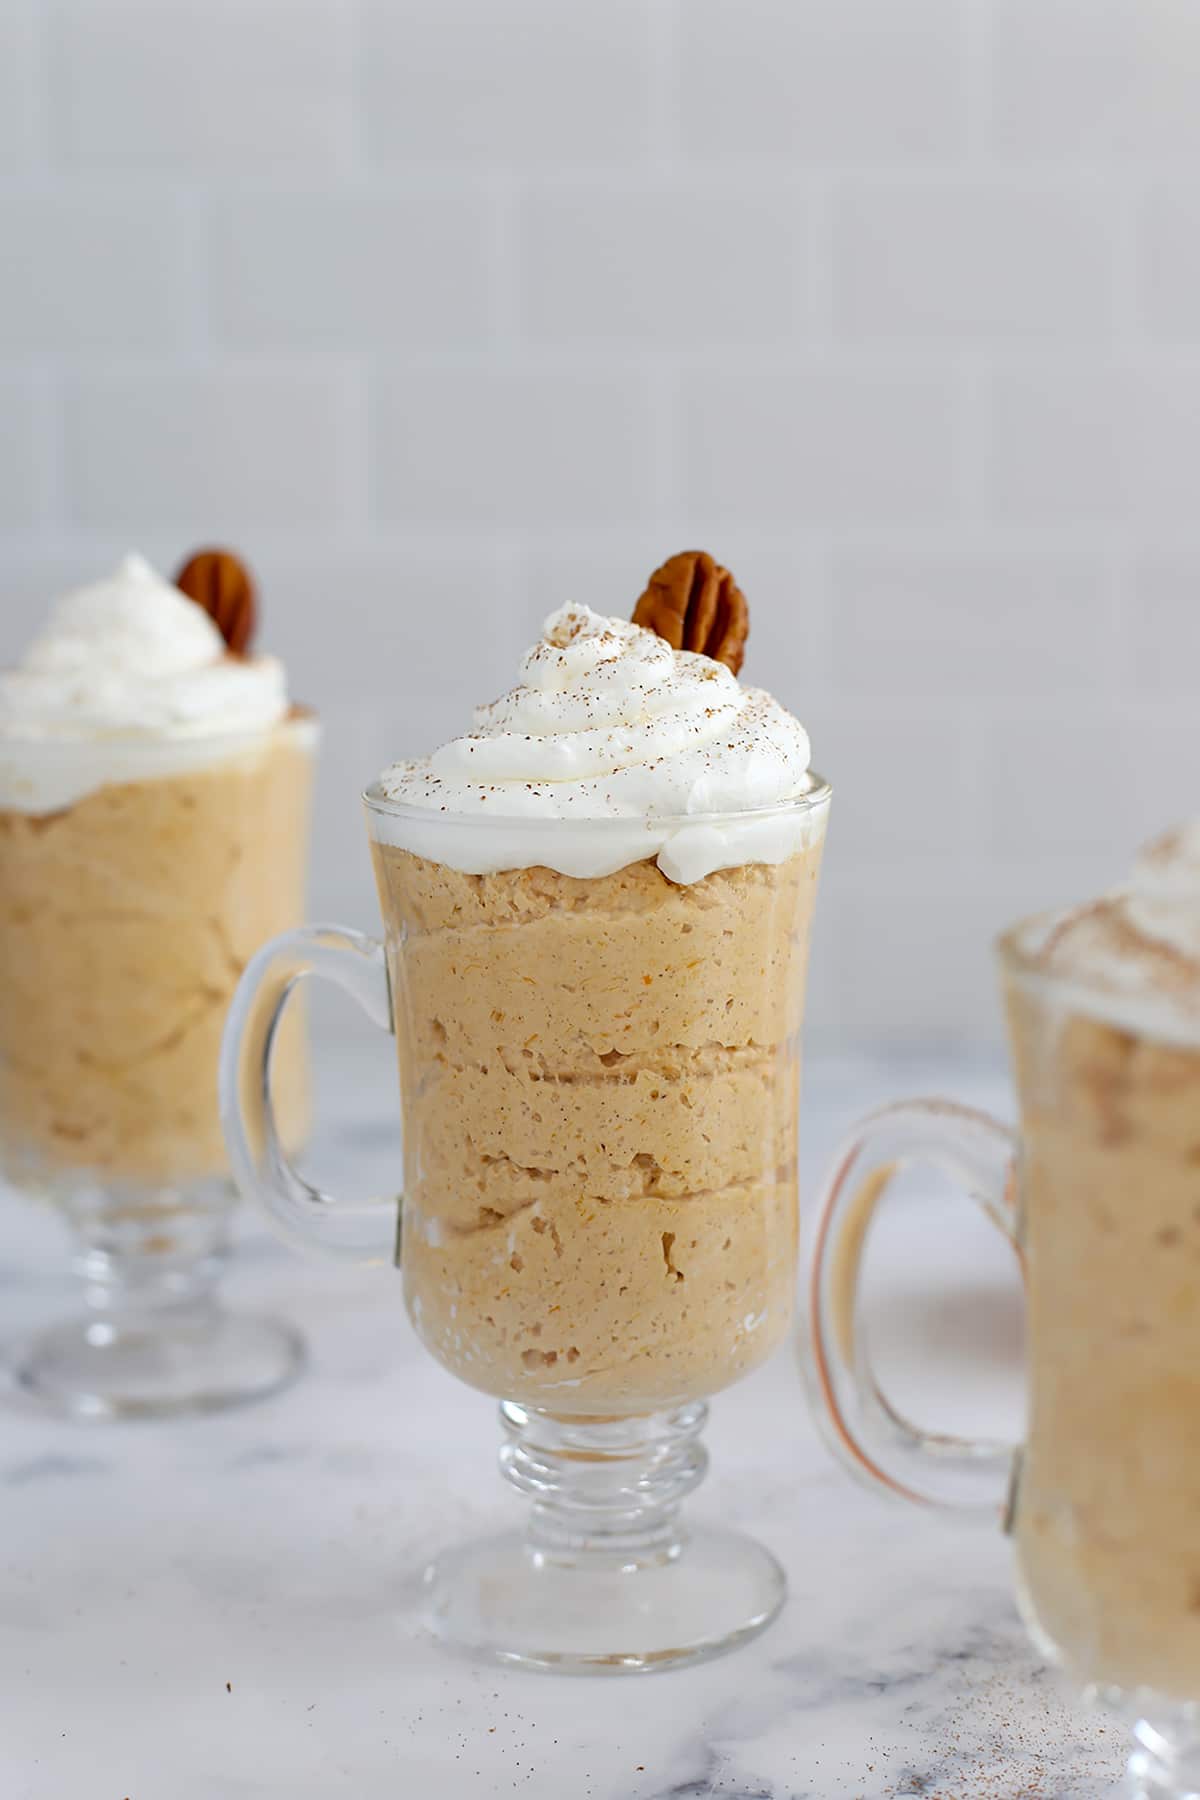 A gl، serving mug filled with pumpkin mousse and topped with whipped cream and a pecan.